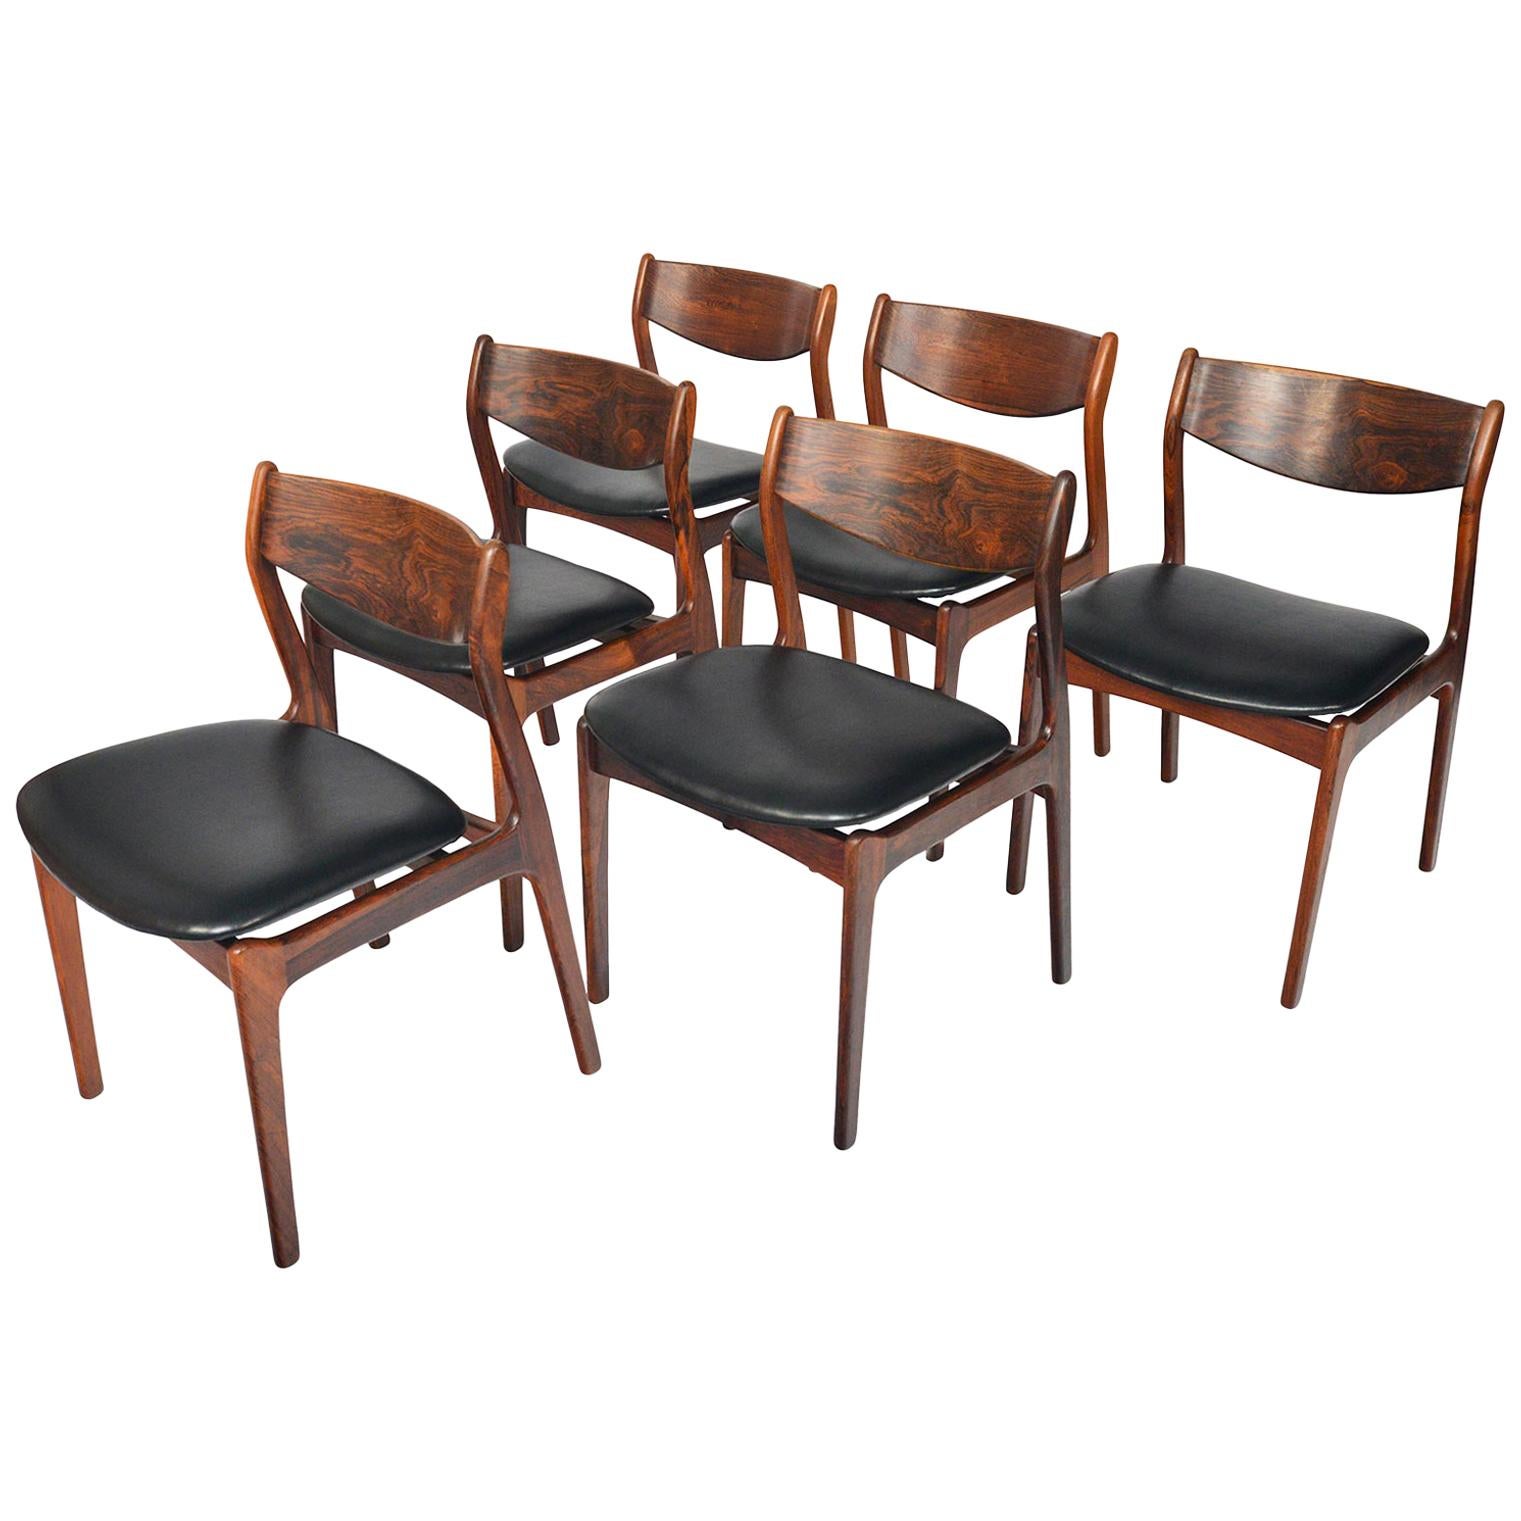 Set of Six P.E. Jørgensen Rosewood and Leather Dining Chairs